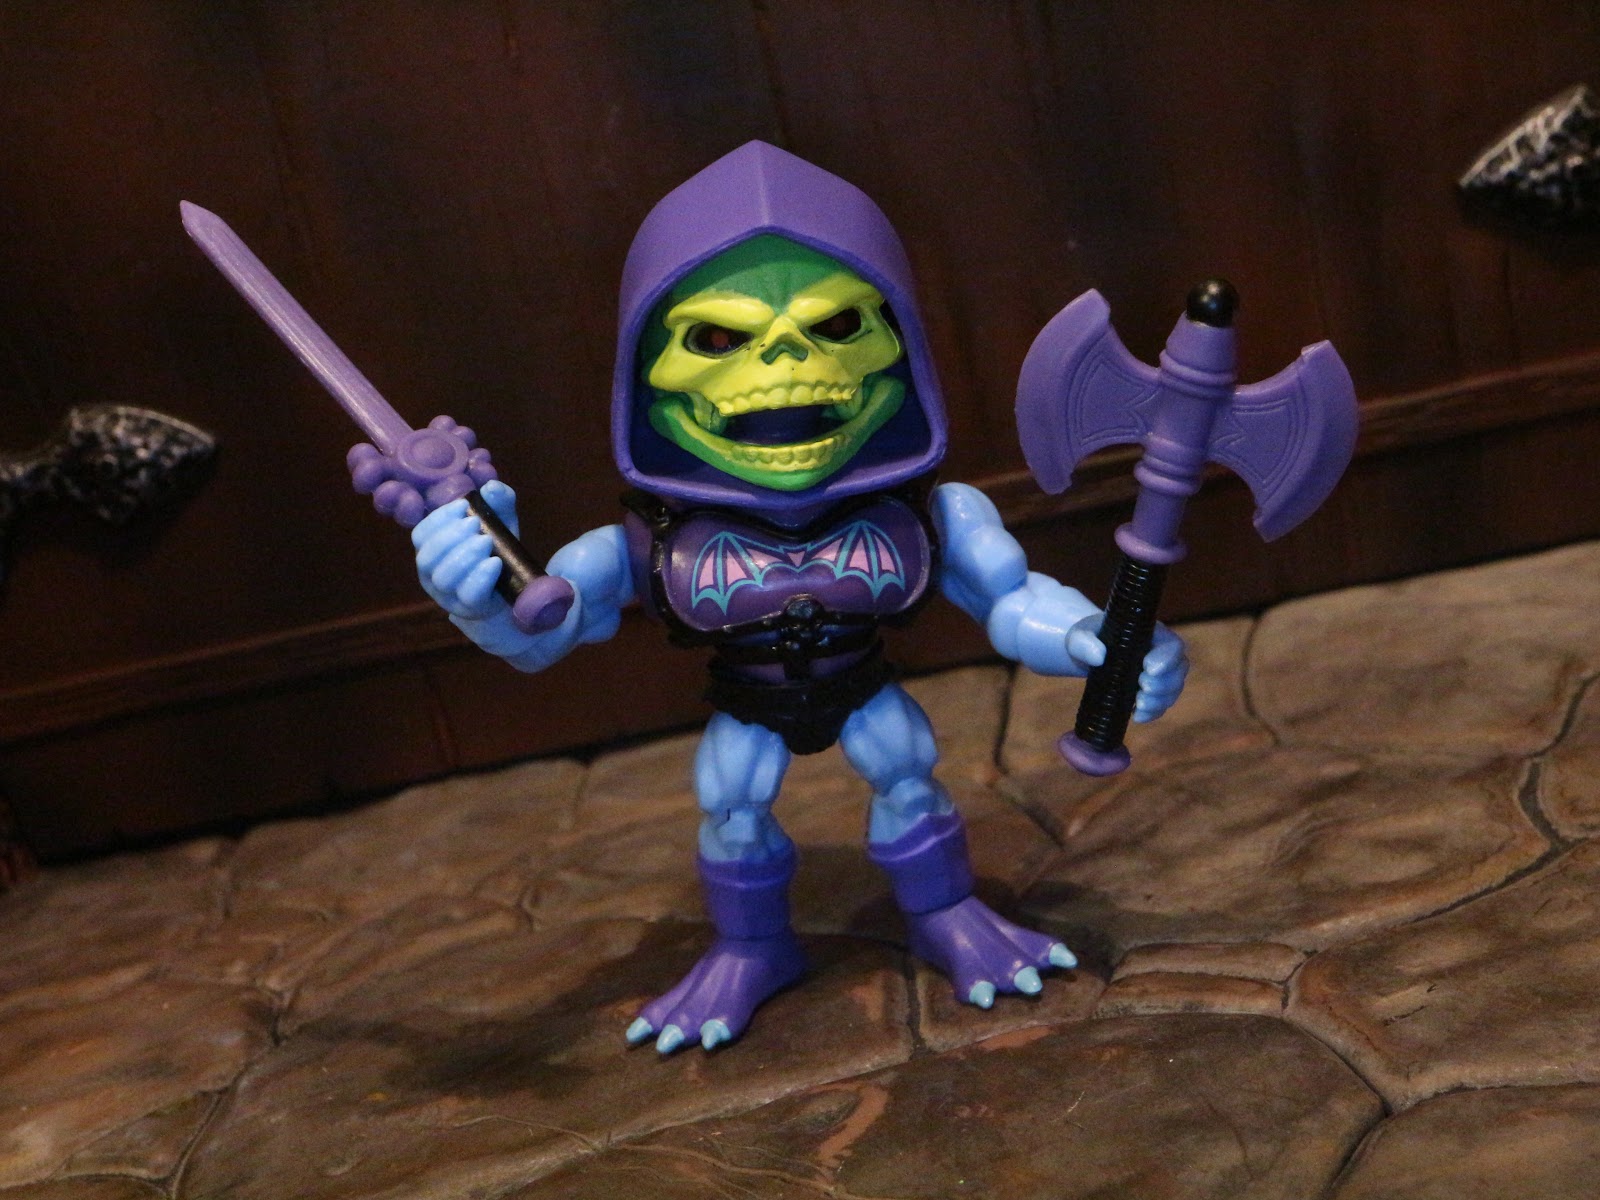 Loyal Subjects Masters of the Universe Wave 2 Battle Armor Skeletor Vinyl Figure 